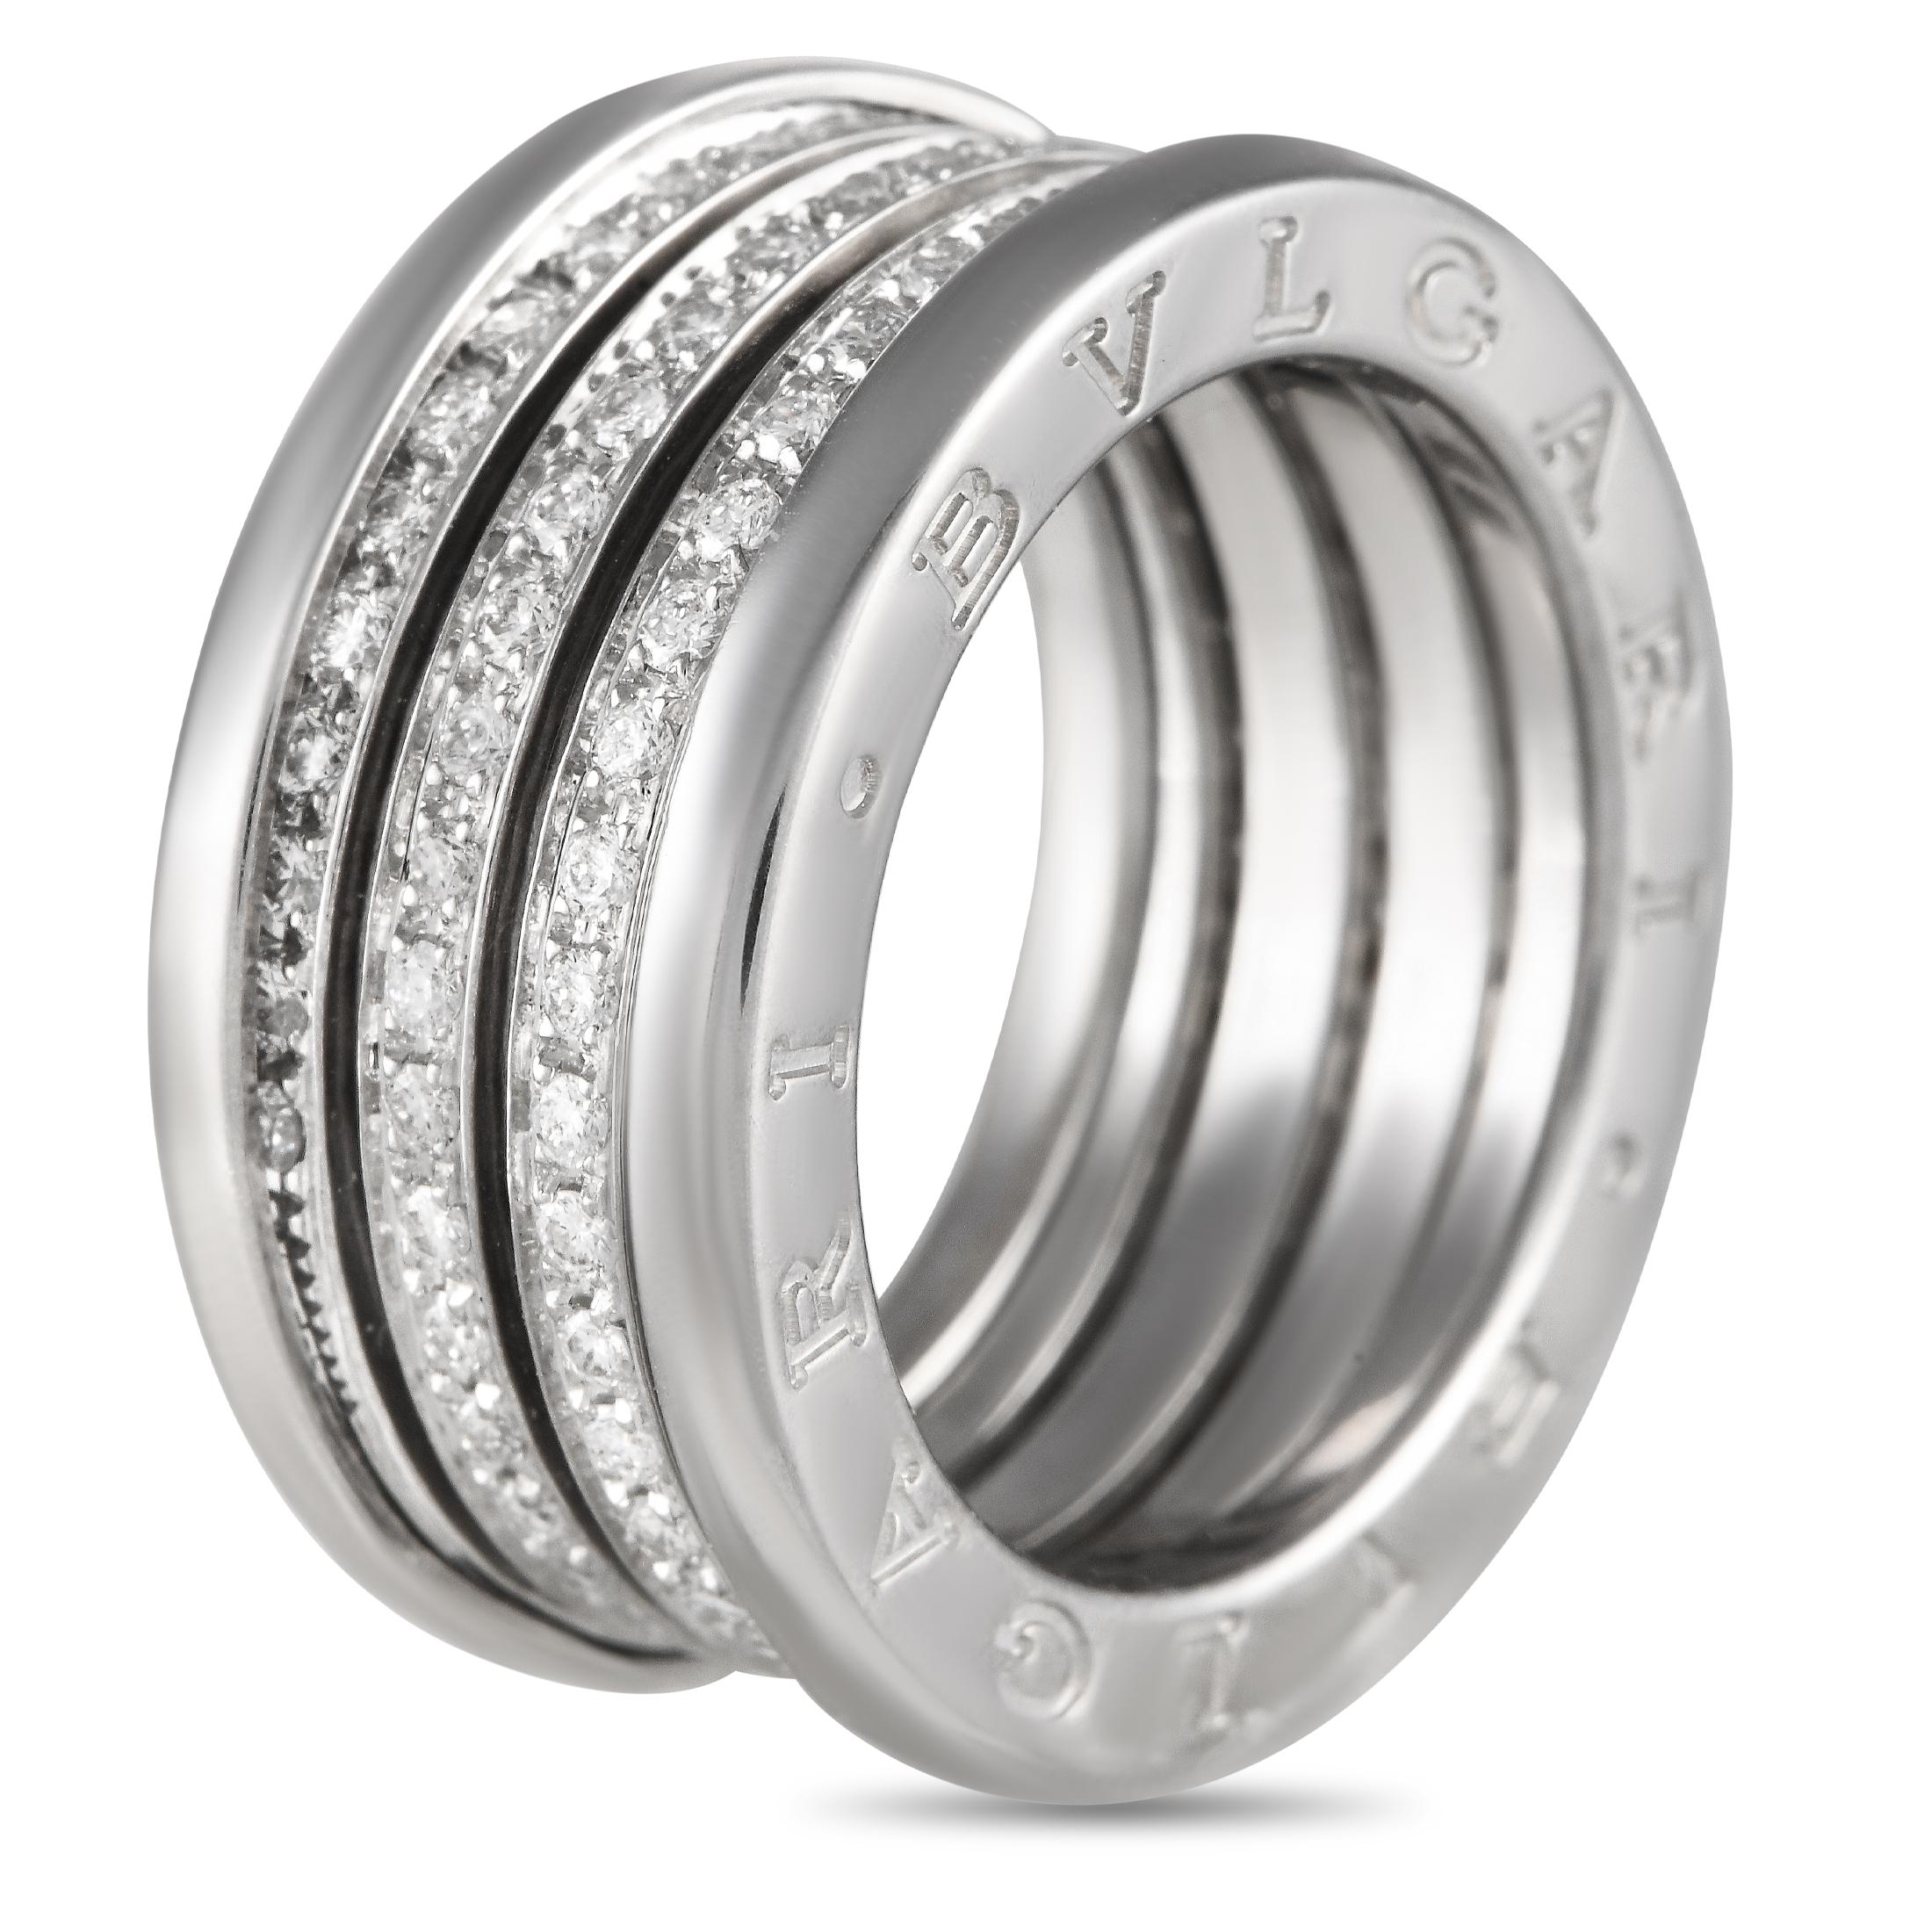 Sparkling inset diamonds with a total weight of 0.80 carats make a statement at the center of a bold 18K White Gold setting on this Bvlgari B.Zero Ring. Incredibly impactful, this piece features a 10mm wide band and a top height measuring